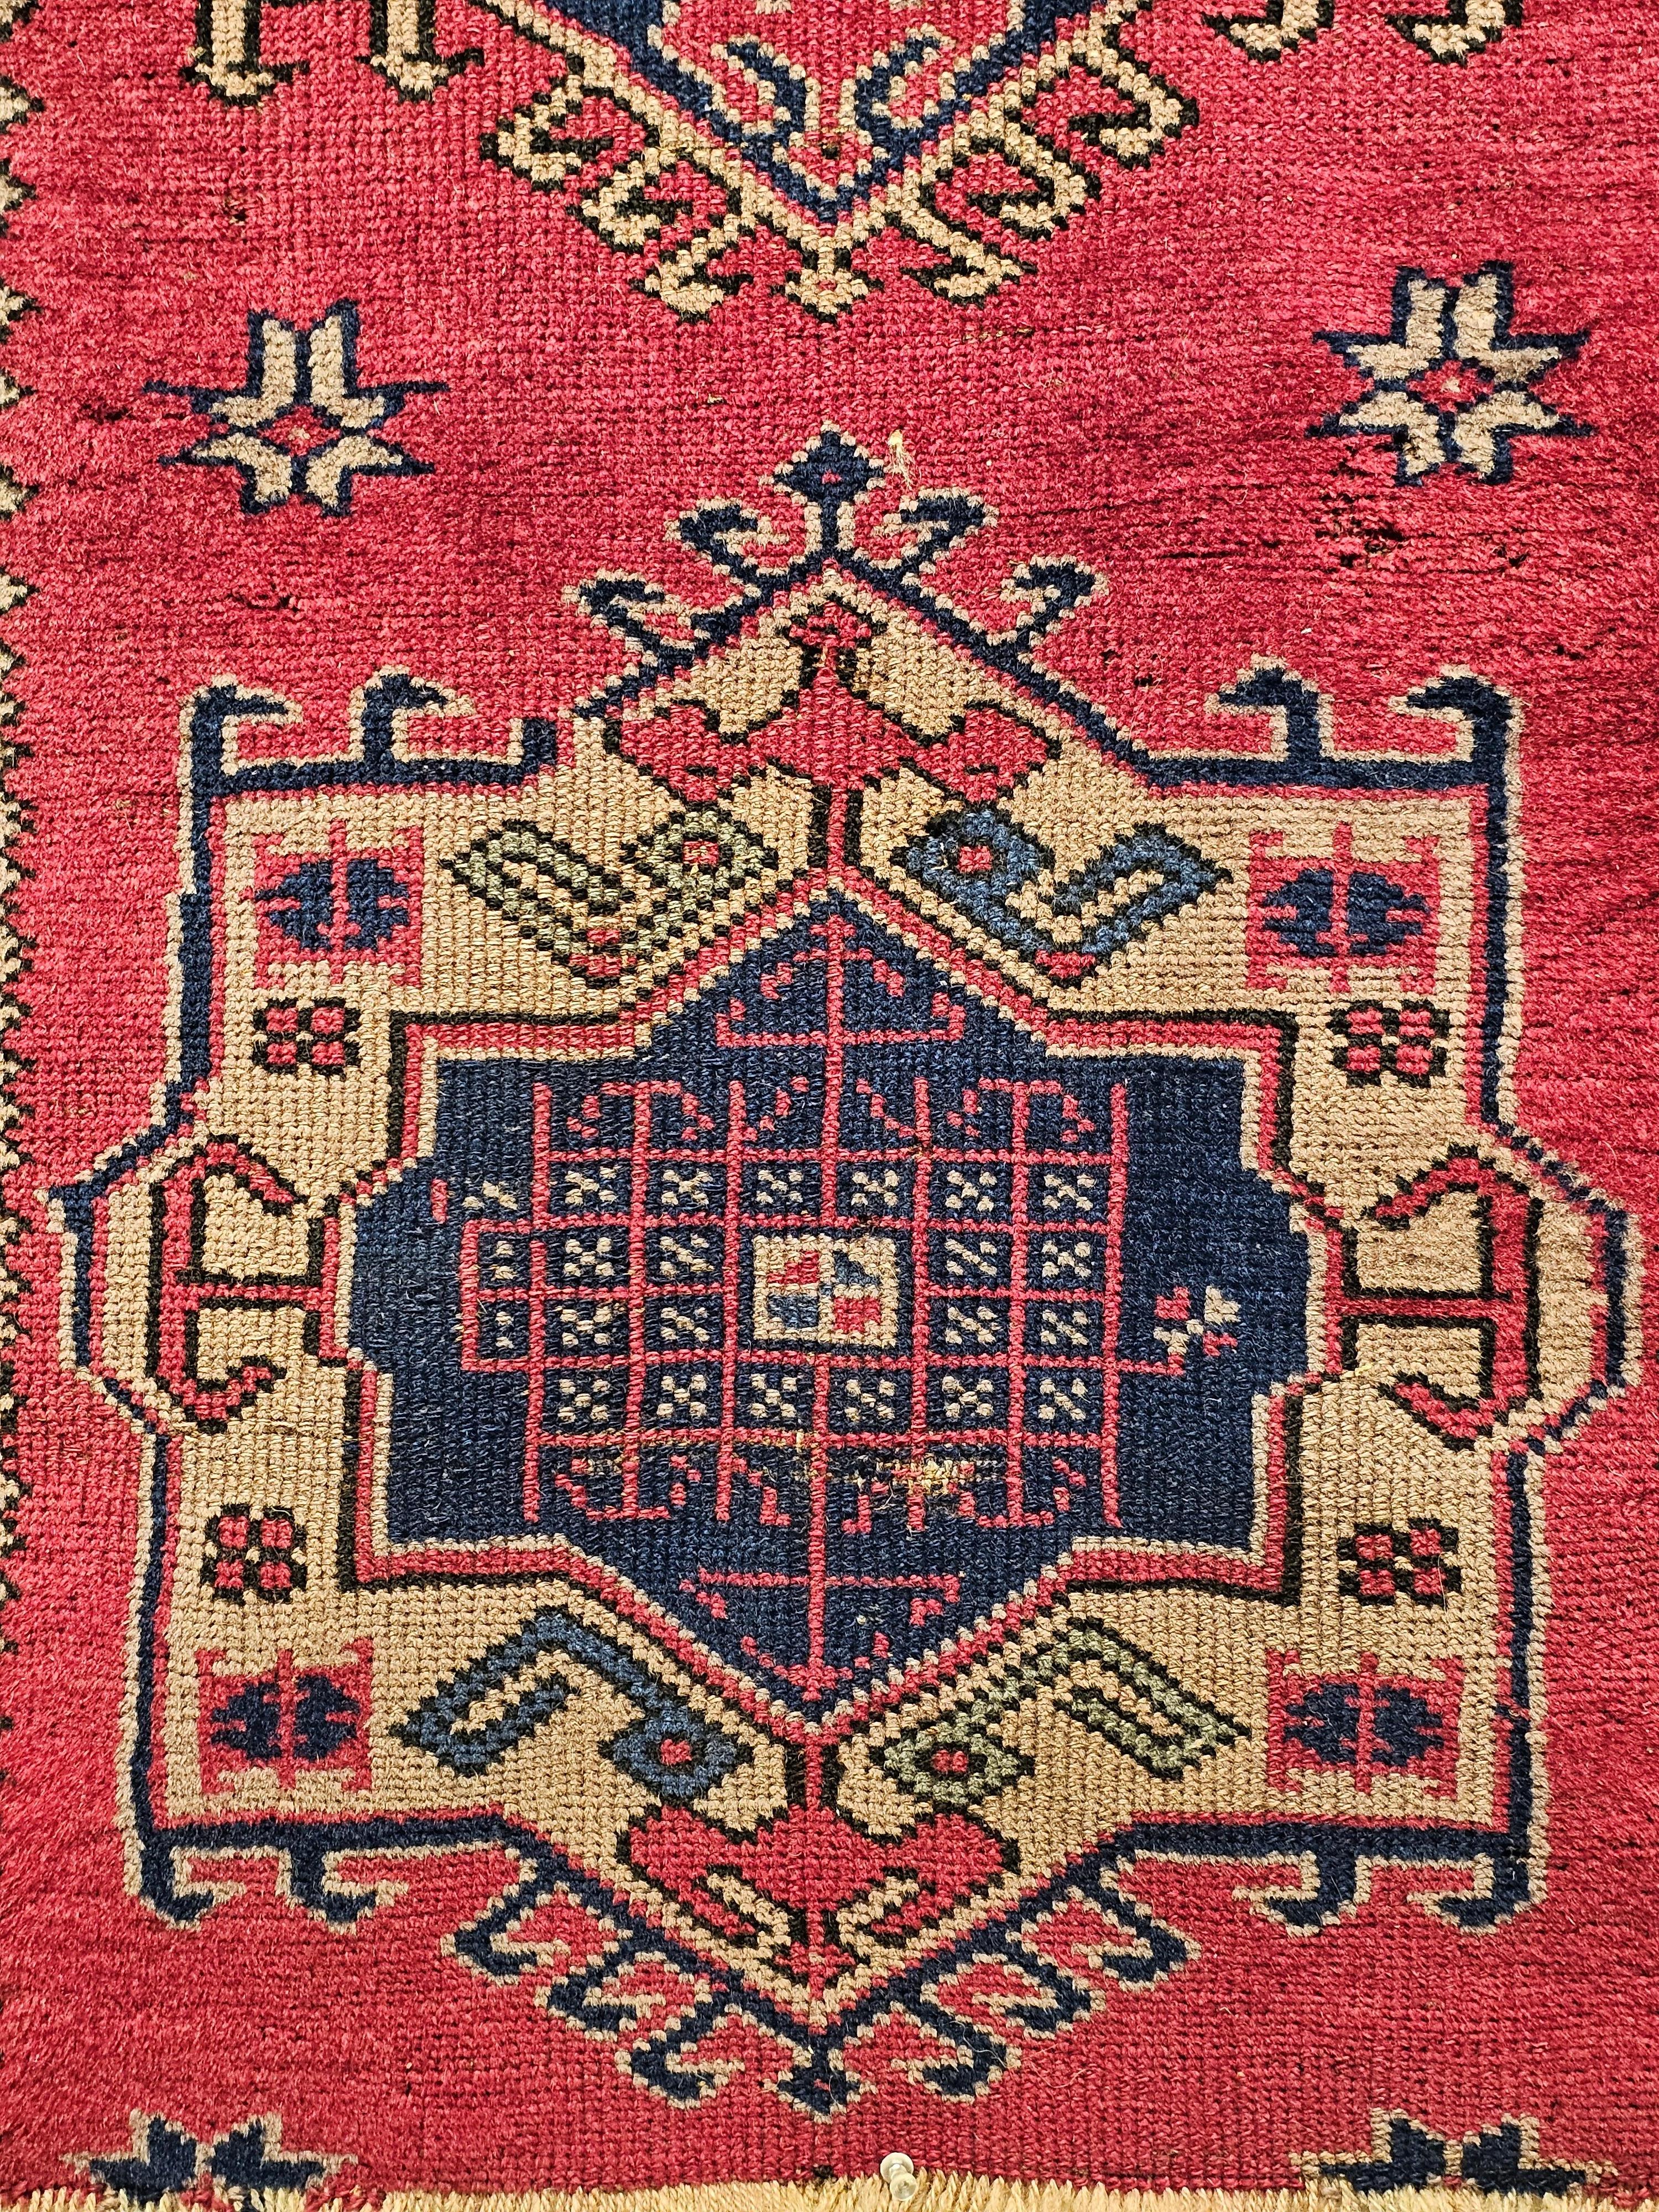 A Turkish village runner in a geometric medallion design similar to the Persian Heriz Karajeh runners.  The runner has a red background with four medallions in alternating colors of  ivory and navy background and designs in green, blue, pink and